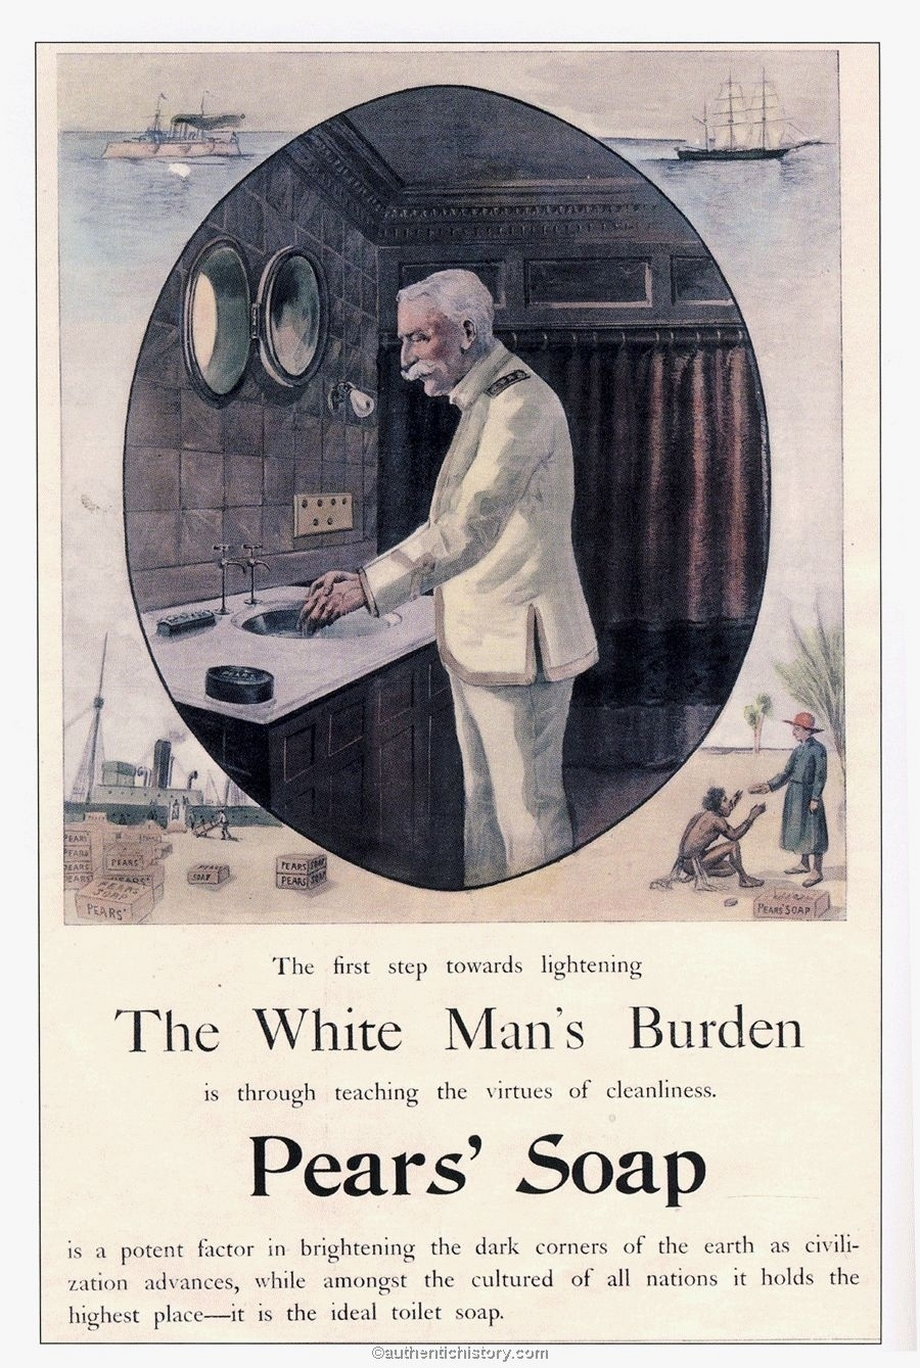 Pear's Soap in the early 1900s described teaching cleanliness as the "white man's burden."